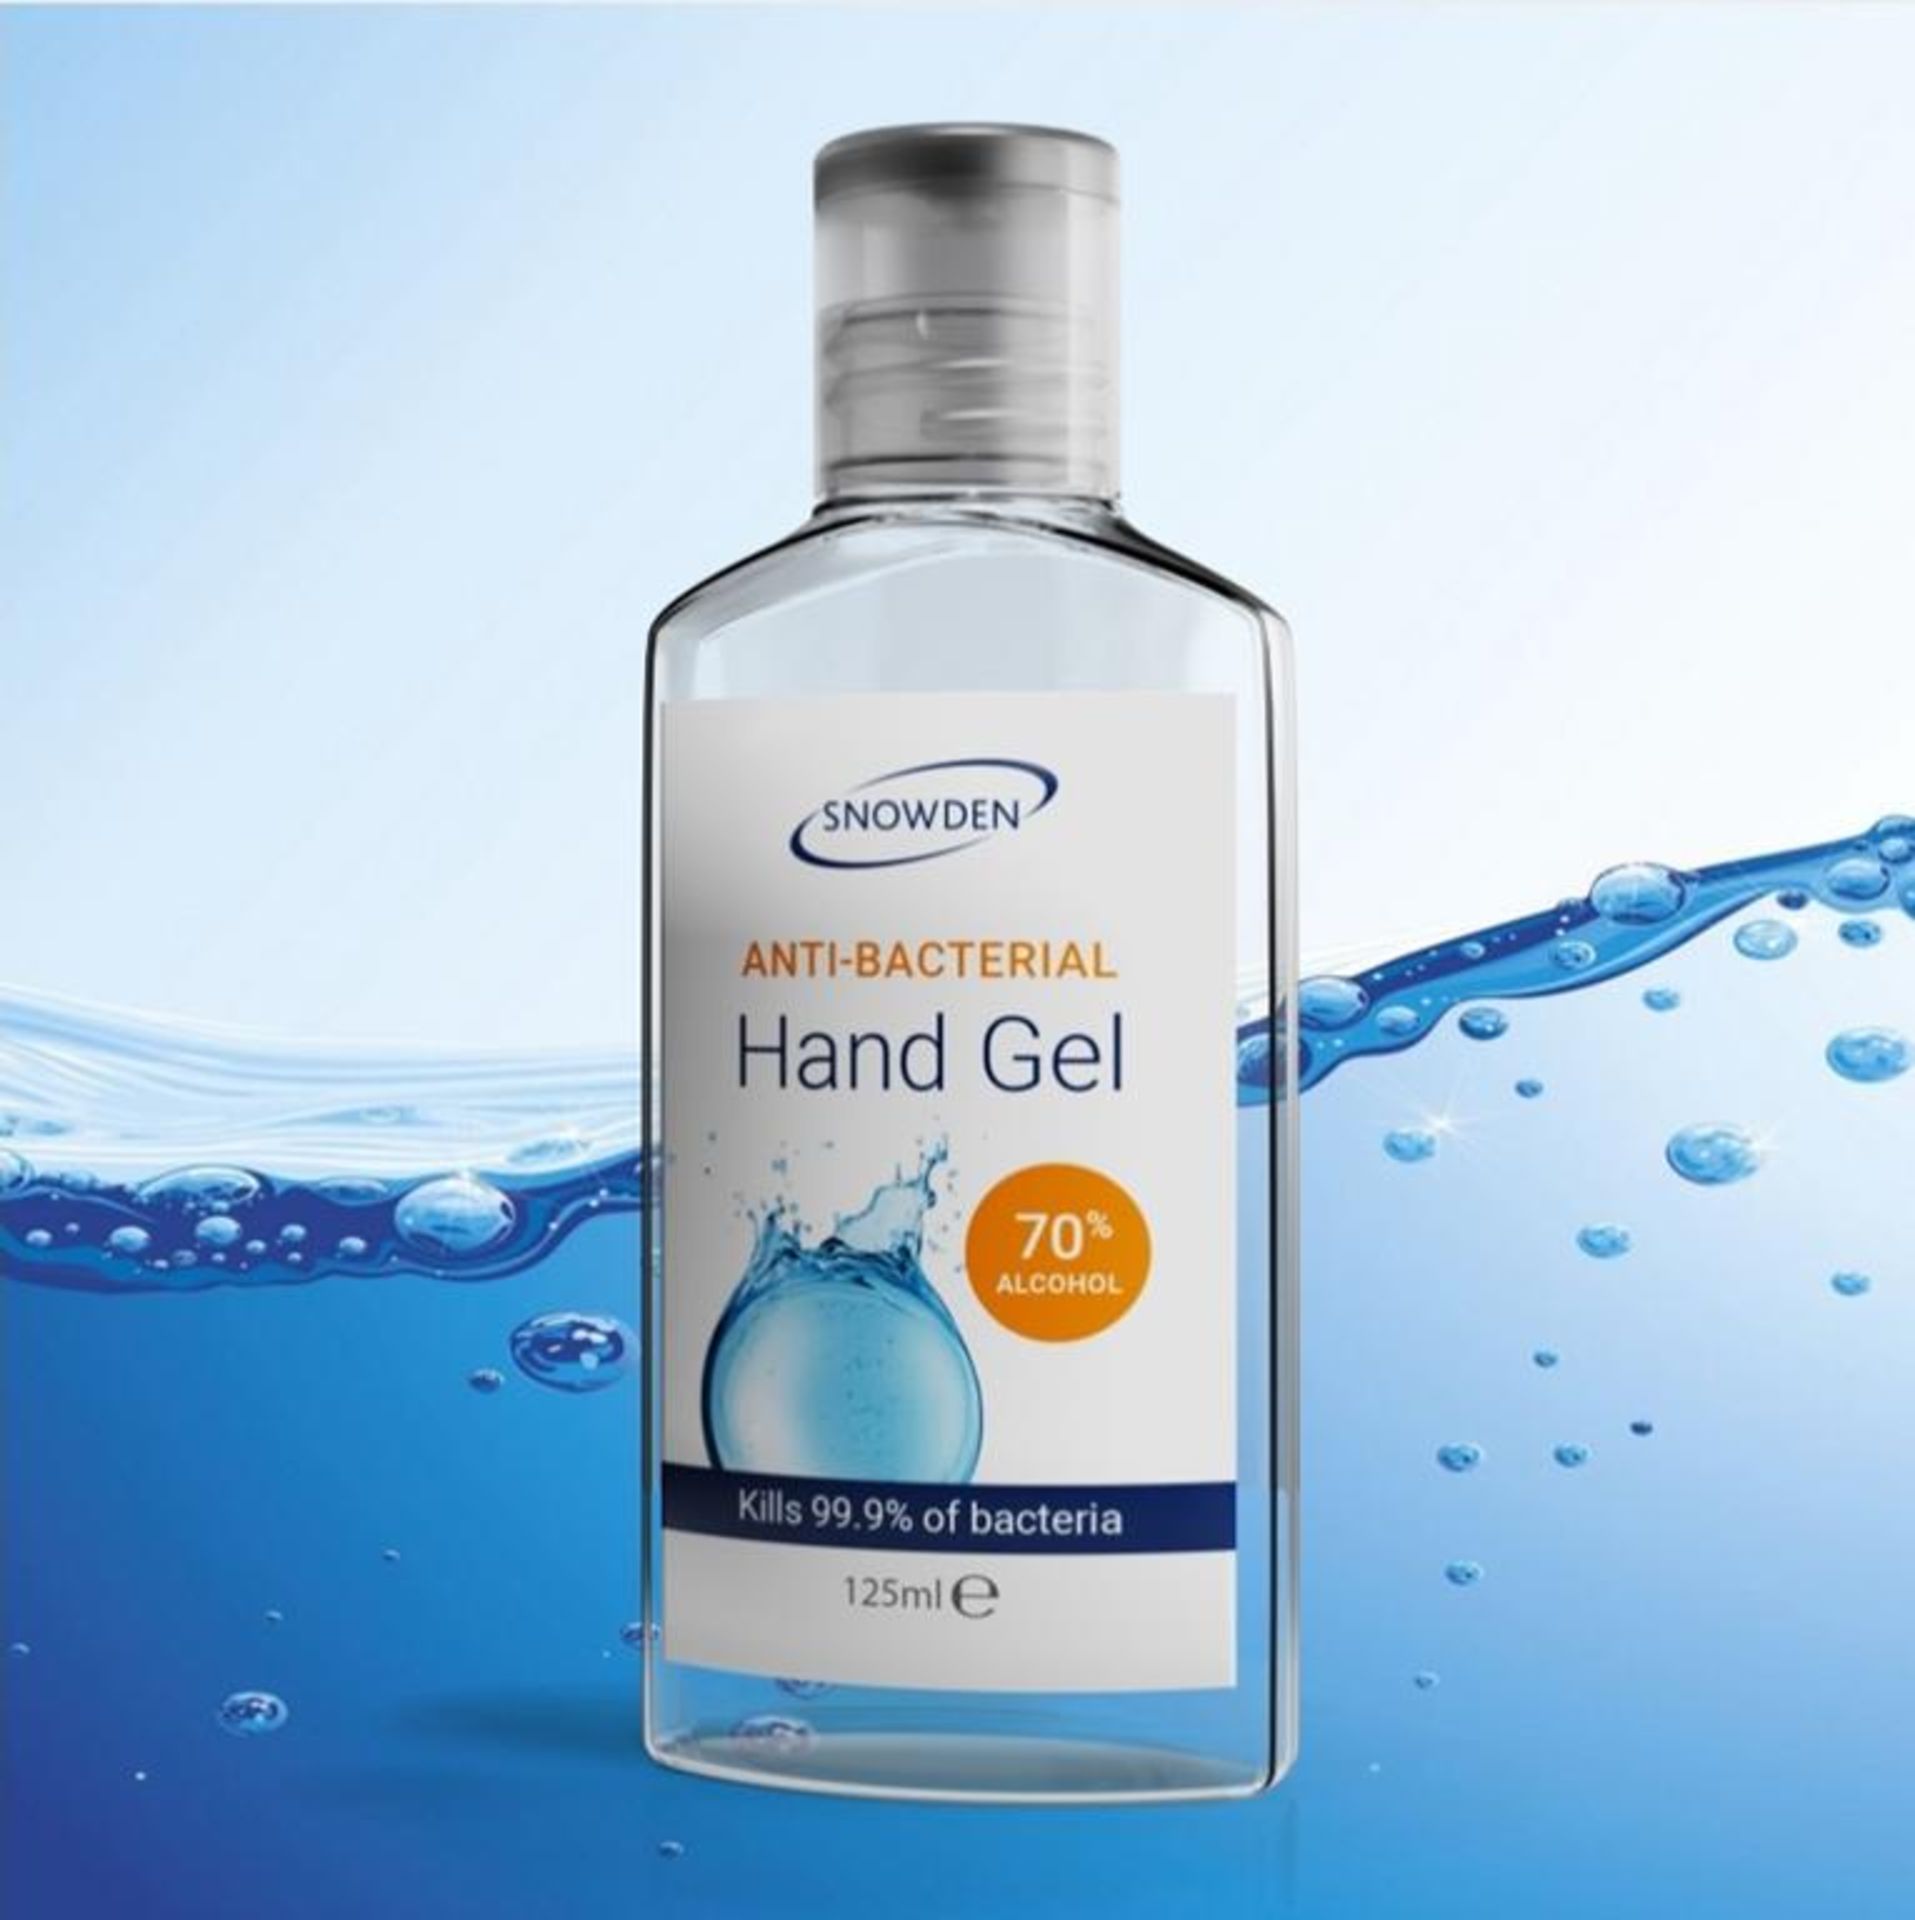 500 bottles of Snowden 125ml 70% alcohol Anti-Bacterial Hand Gel. UK Made; best before date 2023;